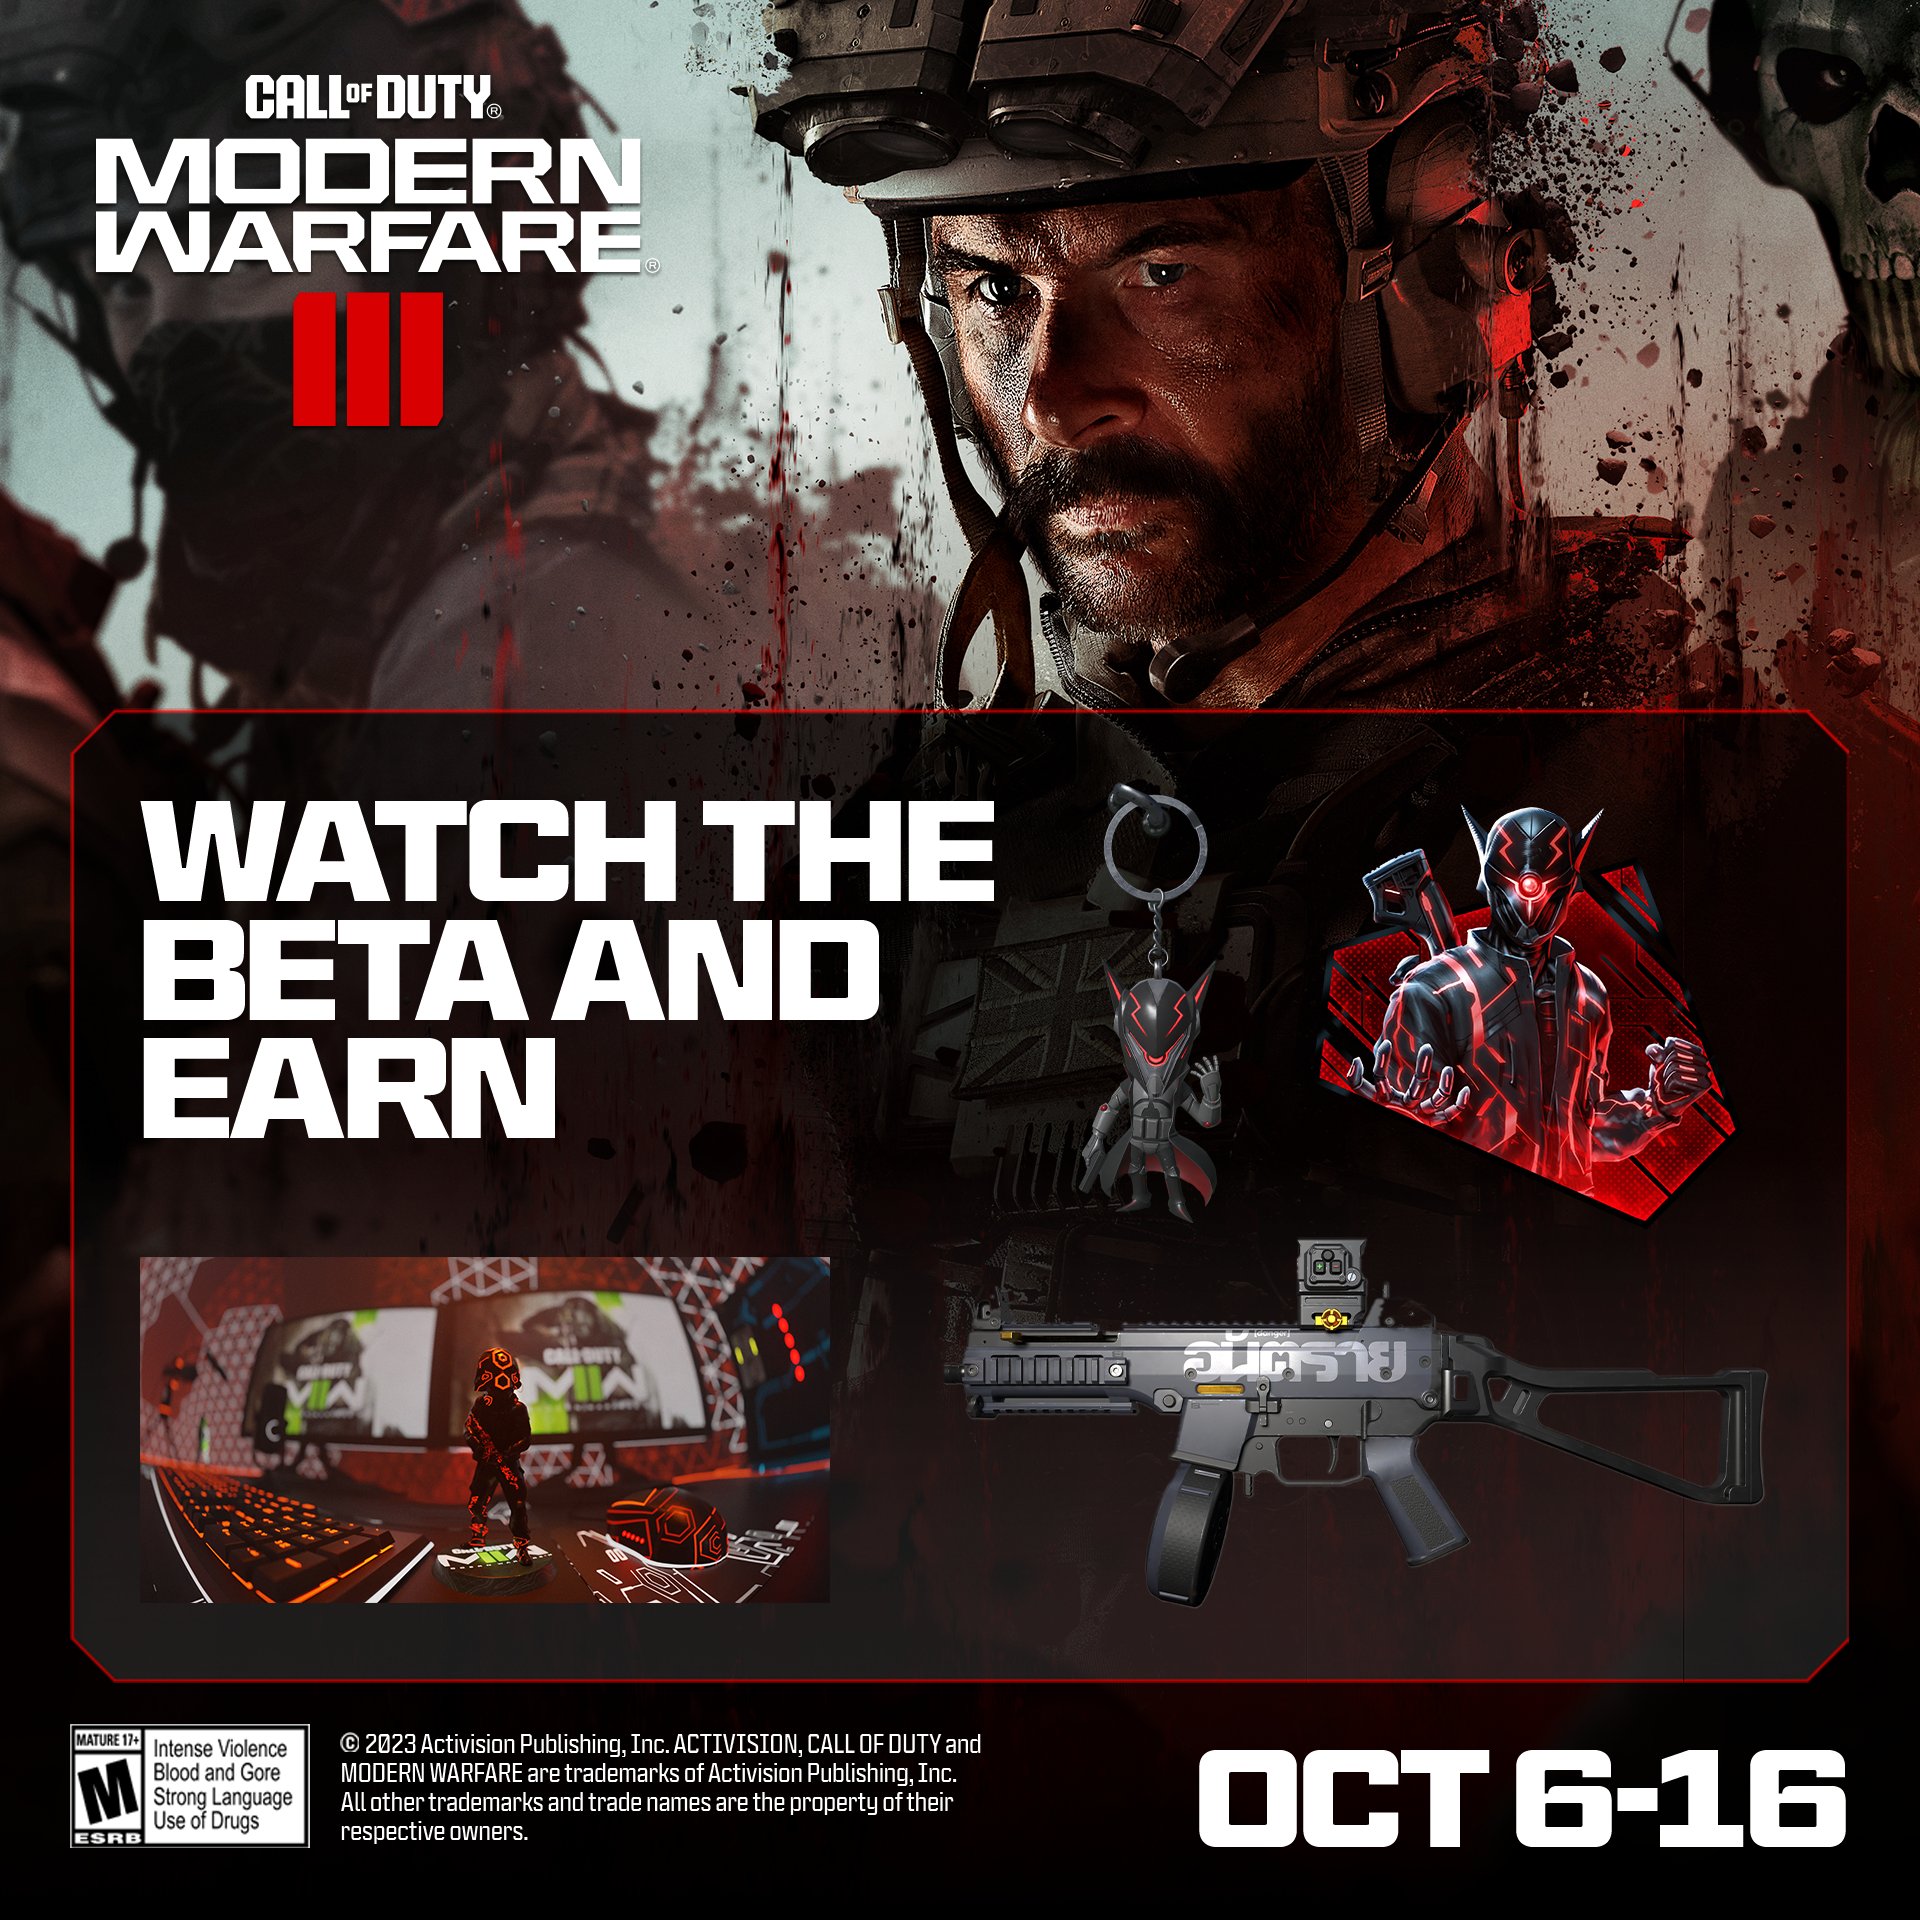 Call of Duty on X: Watch others play the #CODBeta on Twitch and earn  rewards for #MW3 The more you watch 👀 the more items 🎁 you can earn  in-game for Modern